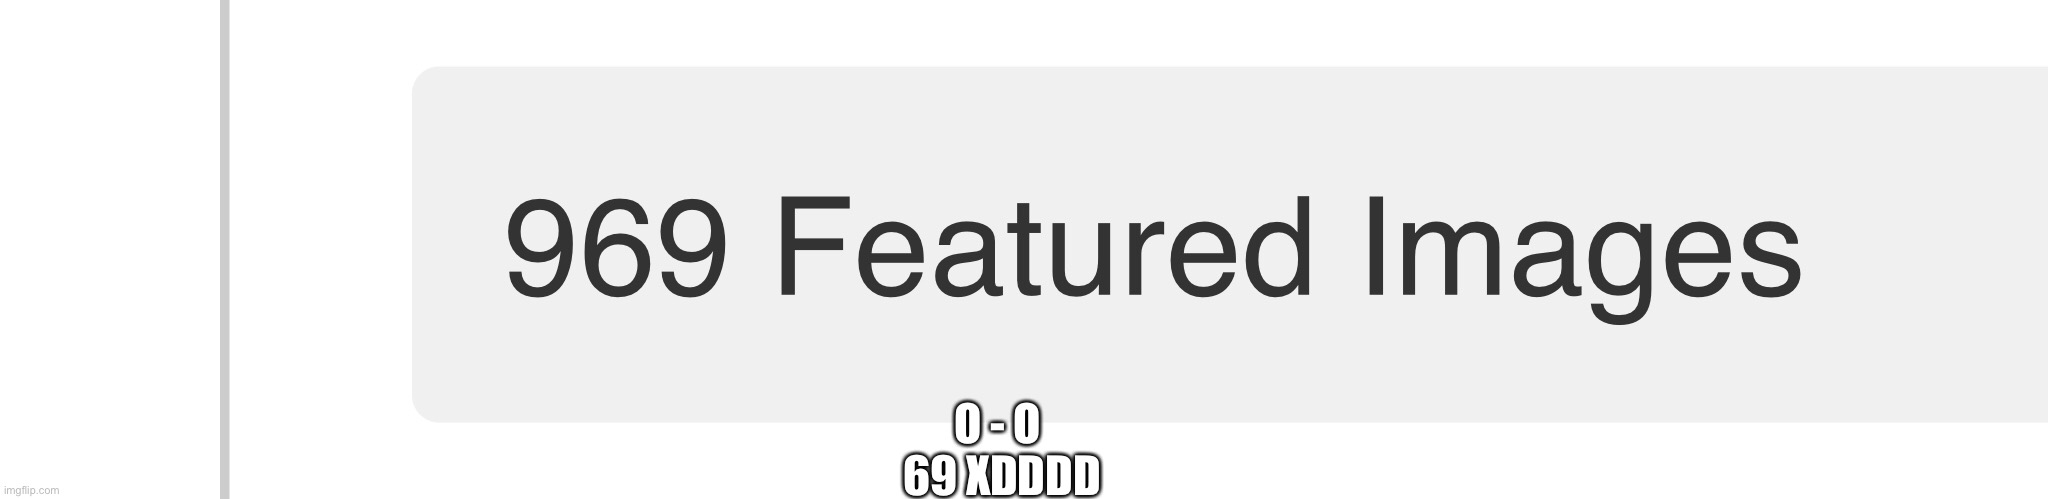 69 | O - O 
69 XDDDD | image tagged in oh shit,lol,oop,69 | made w/ Imgflip meme maker